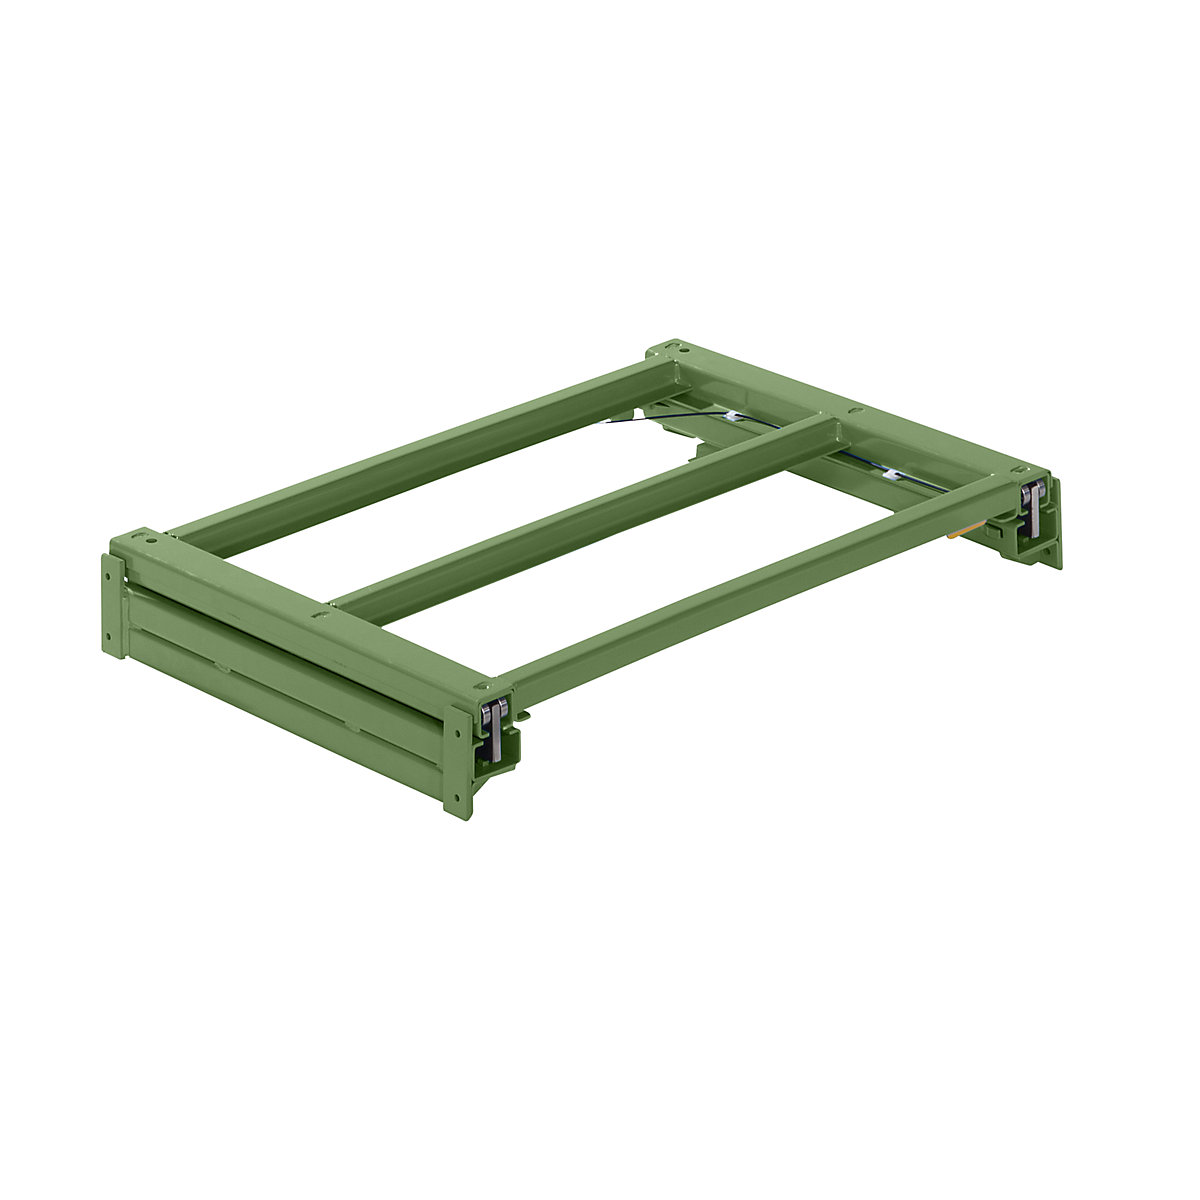 Extension frame – LISTA, WxD 1290 x 860 mm, max. shelf load 1000 kg, 100 % extendable, reseda green-6